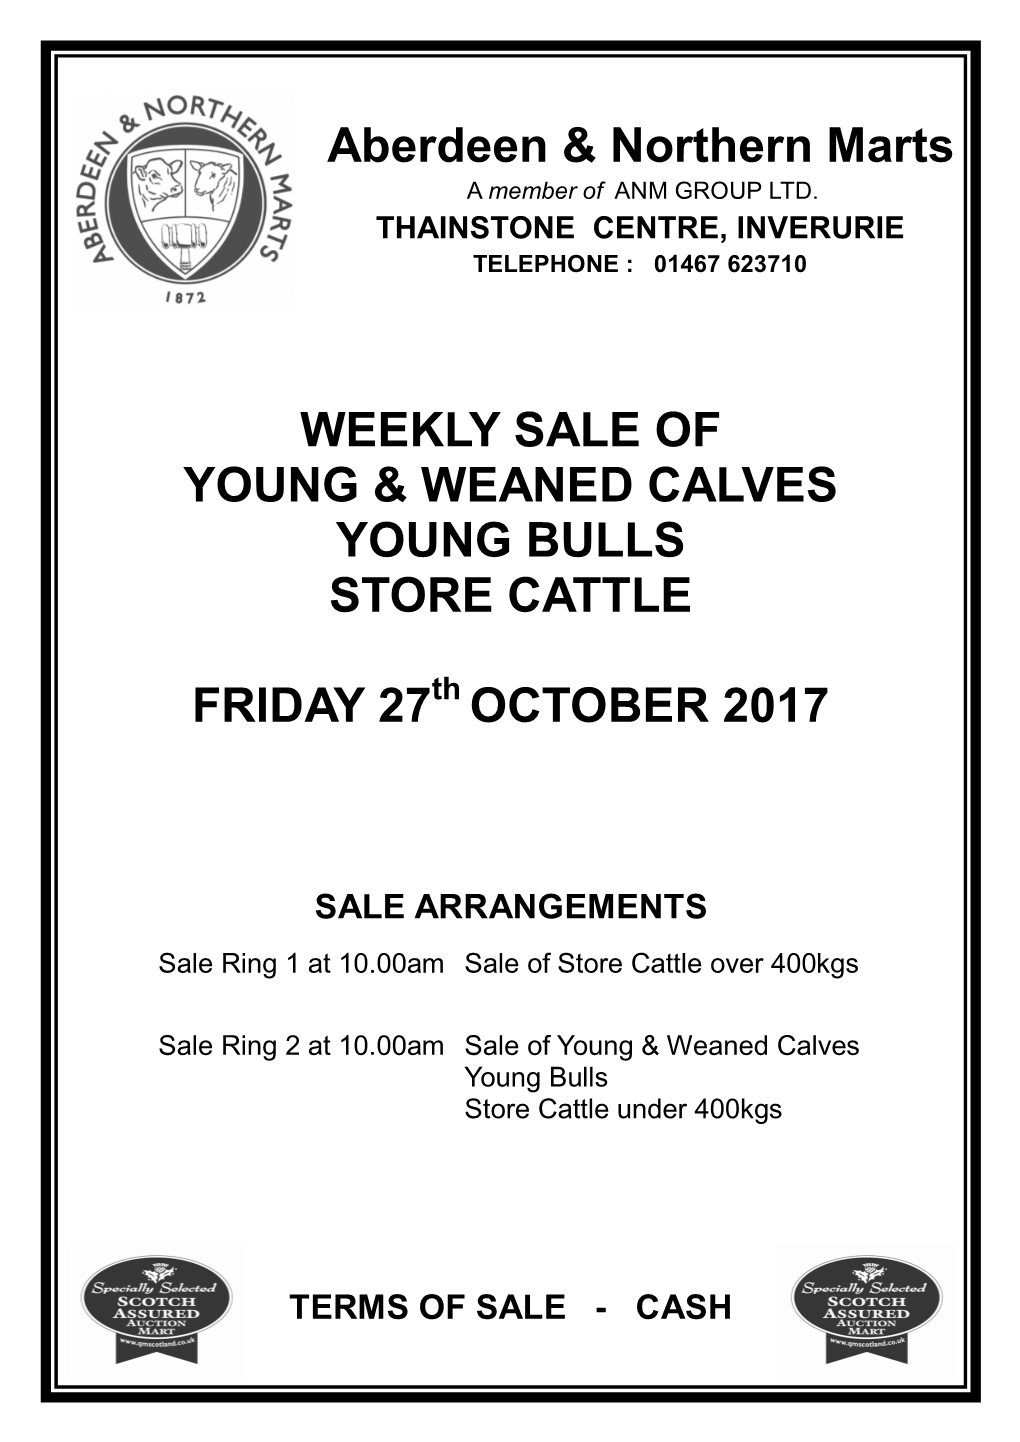 Aberdeen & Northern Marts WEEKLY SALE of YOUNG & WEANED CALVES YOUNG BULLS STORE CATTLE FRIDAY 27 OCTOBER 2017